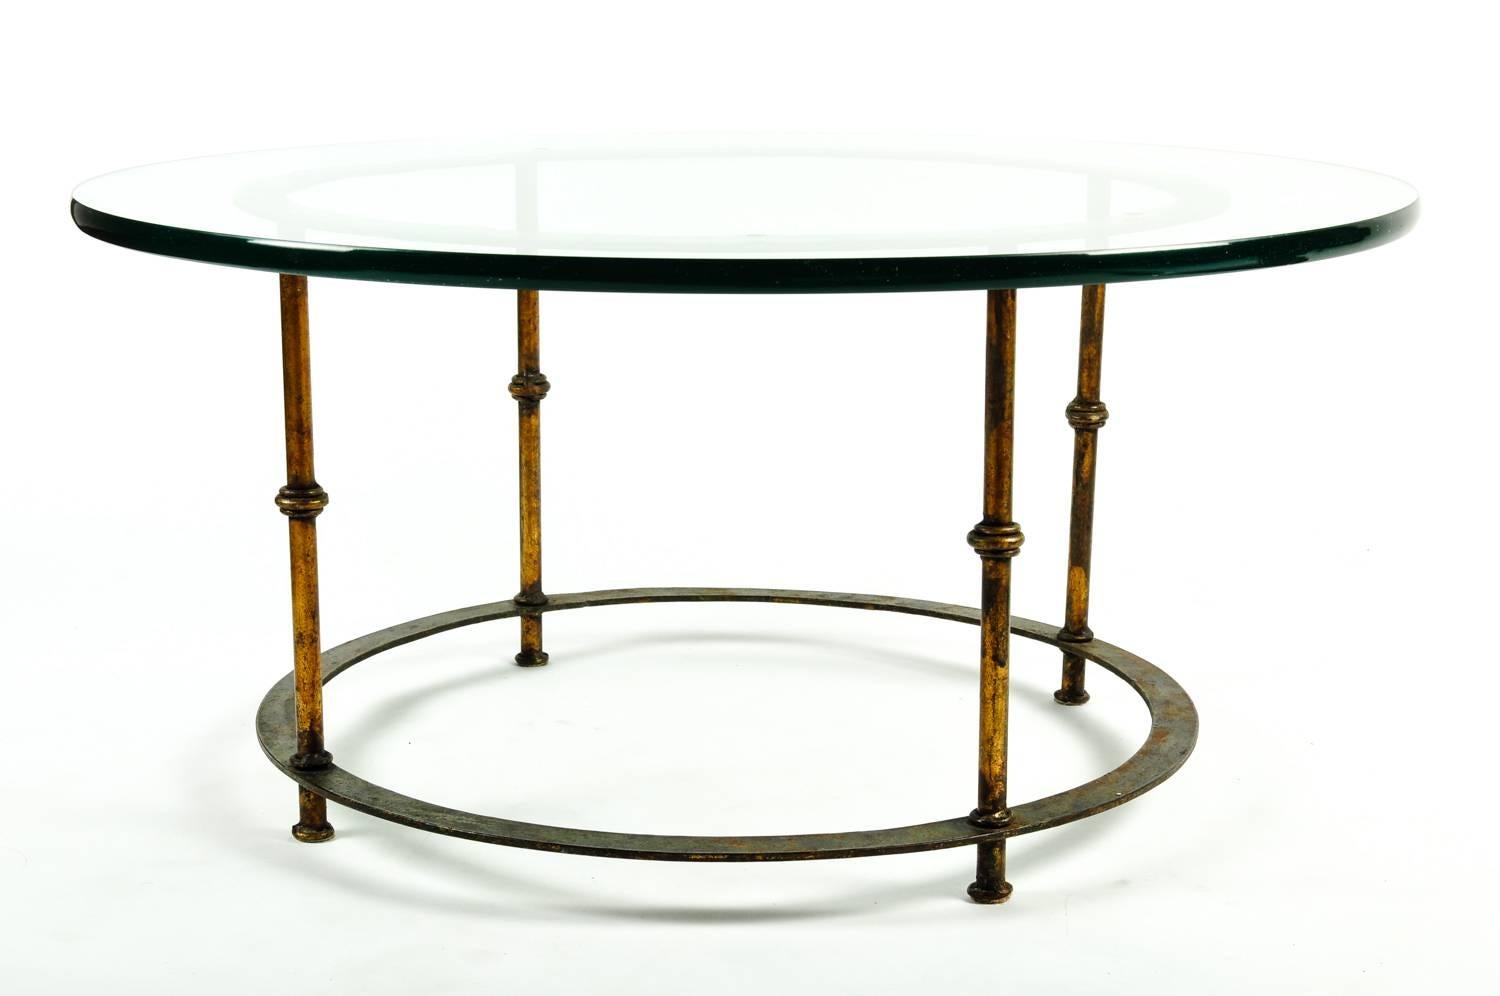 Mid-Century round brass table with detachable heavy glass top. The round table measure 19 inches high x 34 inches diameter. Excellent condition.